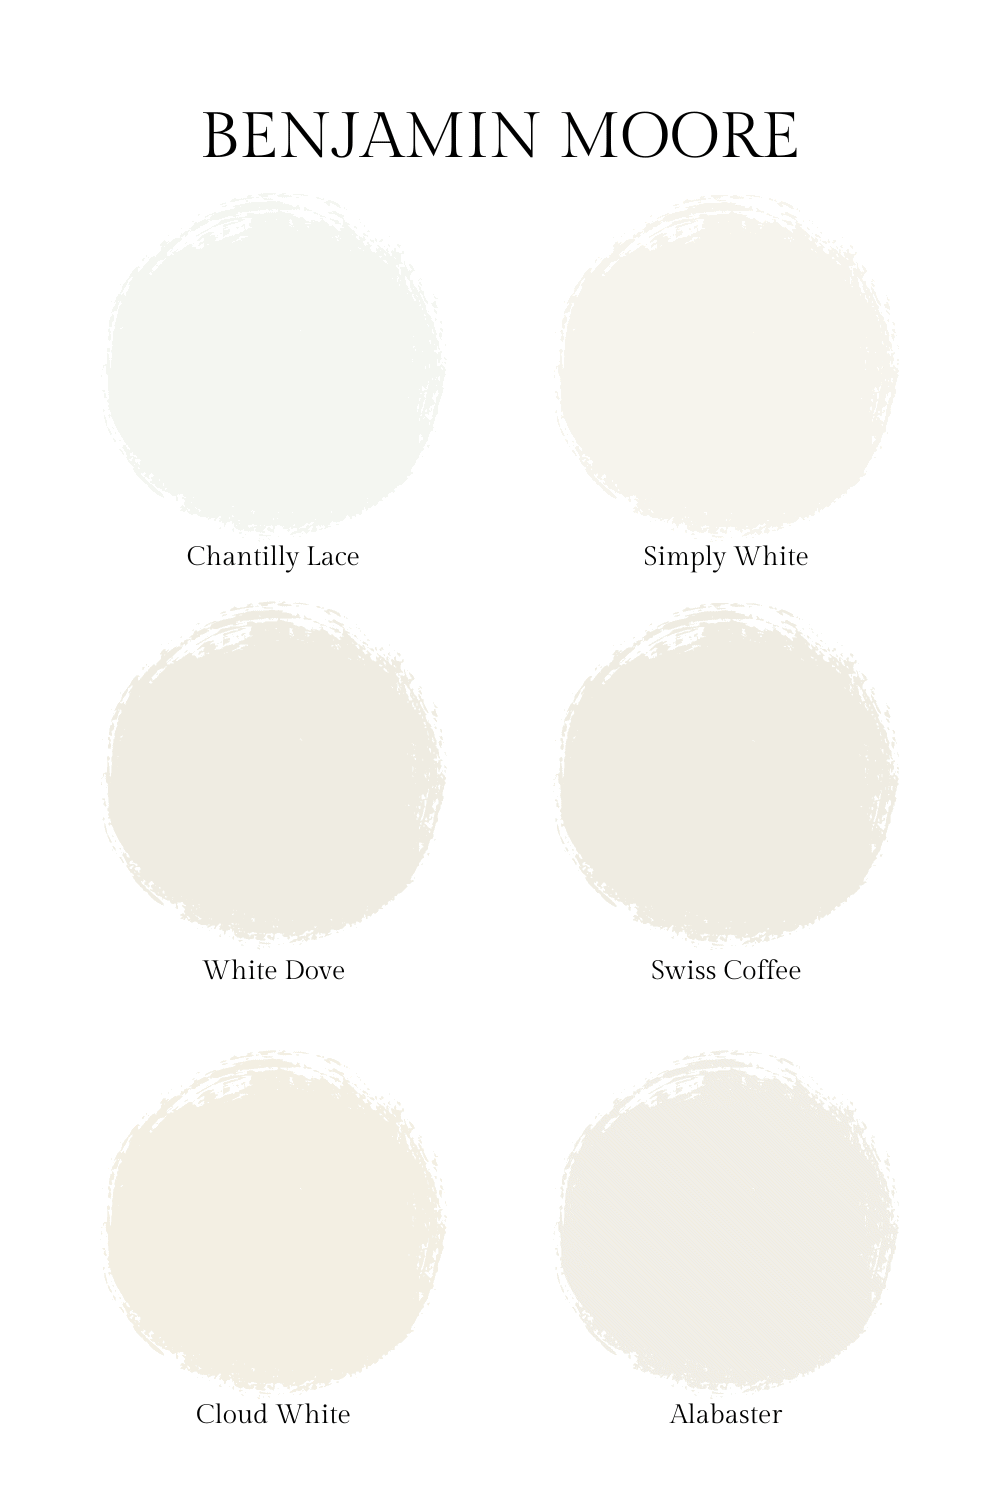 paint swatches of popular Benjamin Moore white paint colors